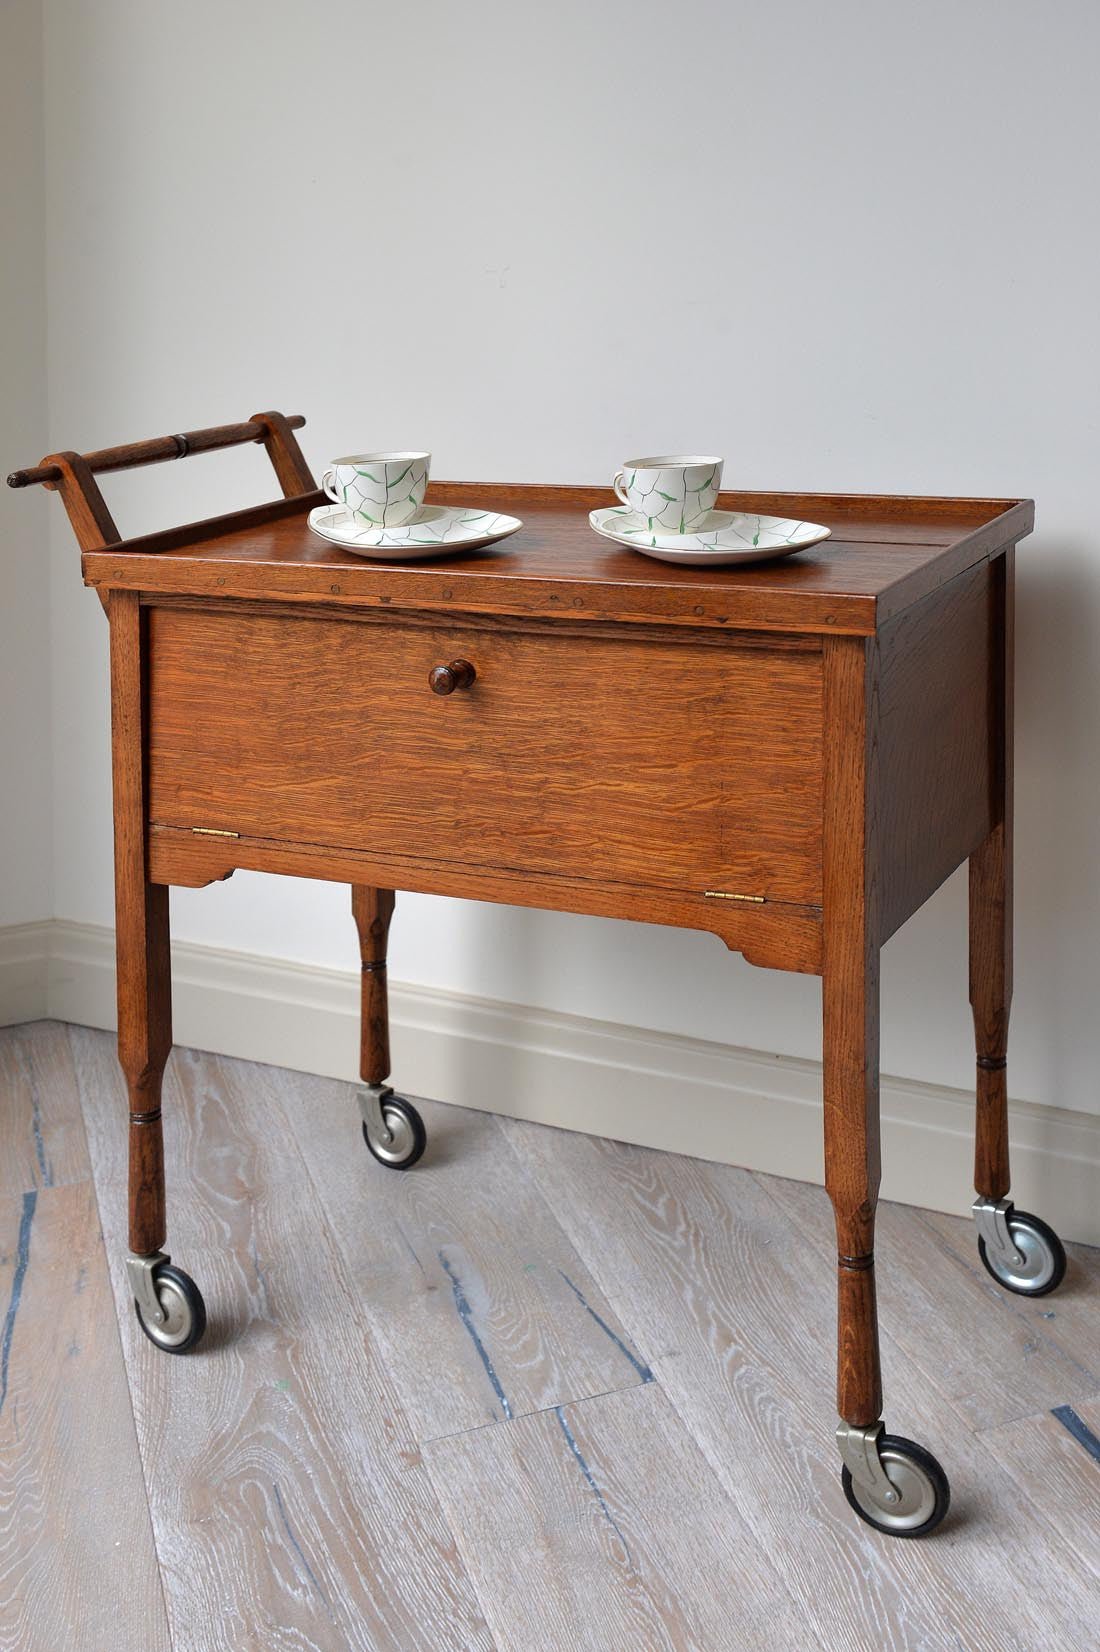 L'Atelier vintage trolley featured on Houzz and How oak fits well with the Japanese aesthetic - Natalia Willmott